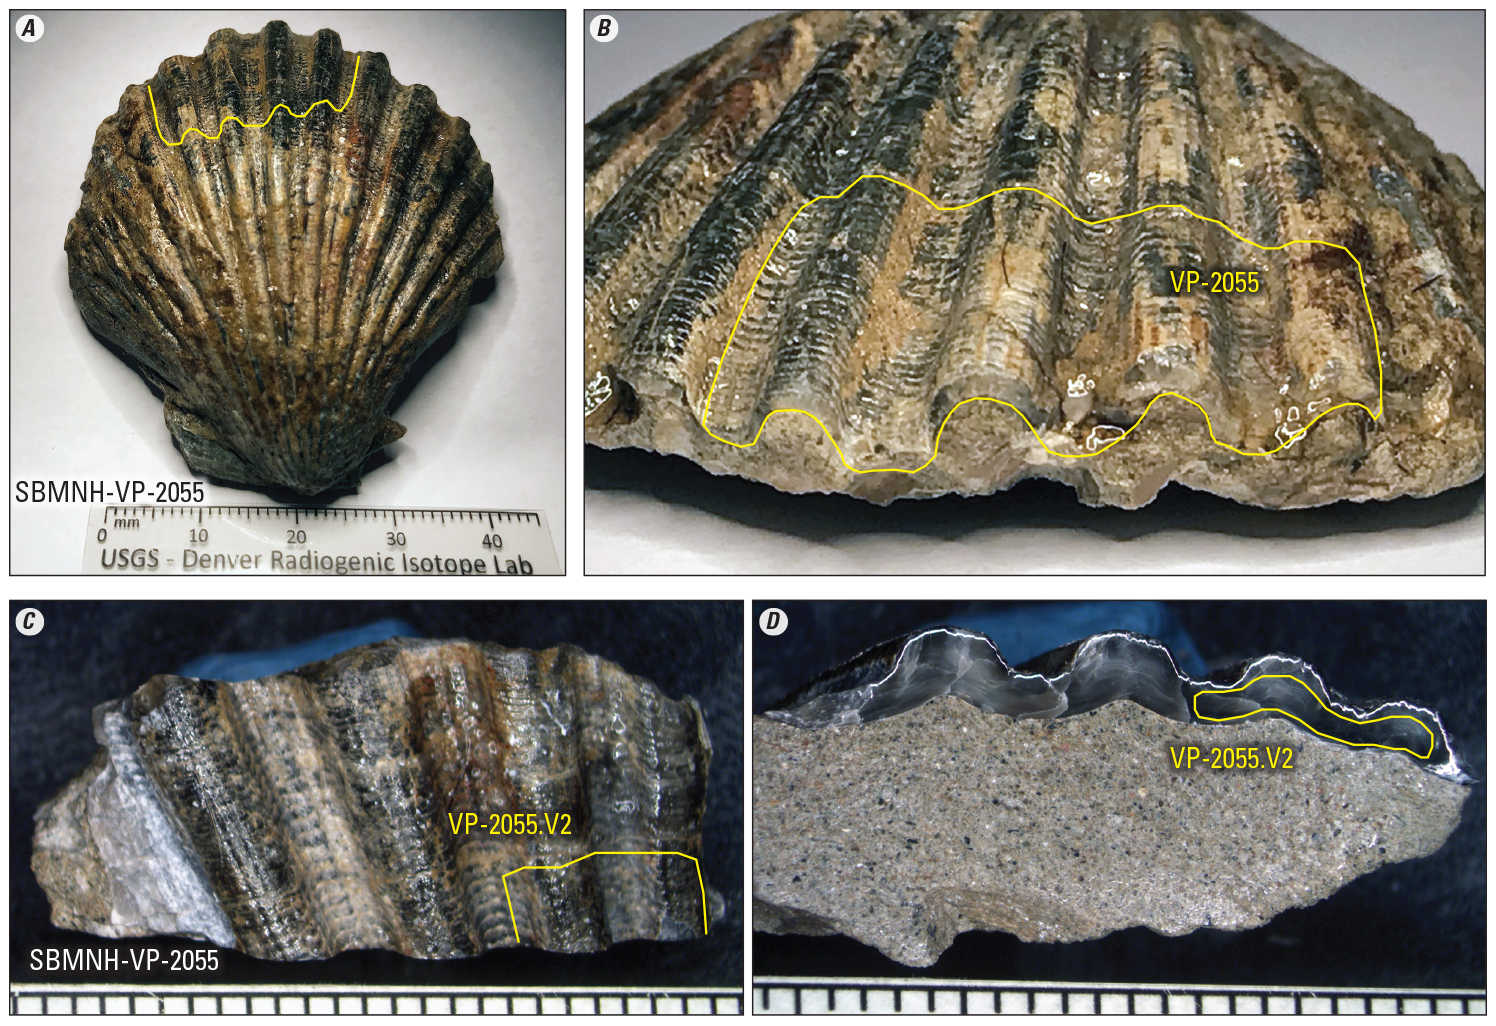 A whole shell, close-ups of sampled areas, and a cross-section showing sampled area.